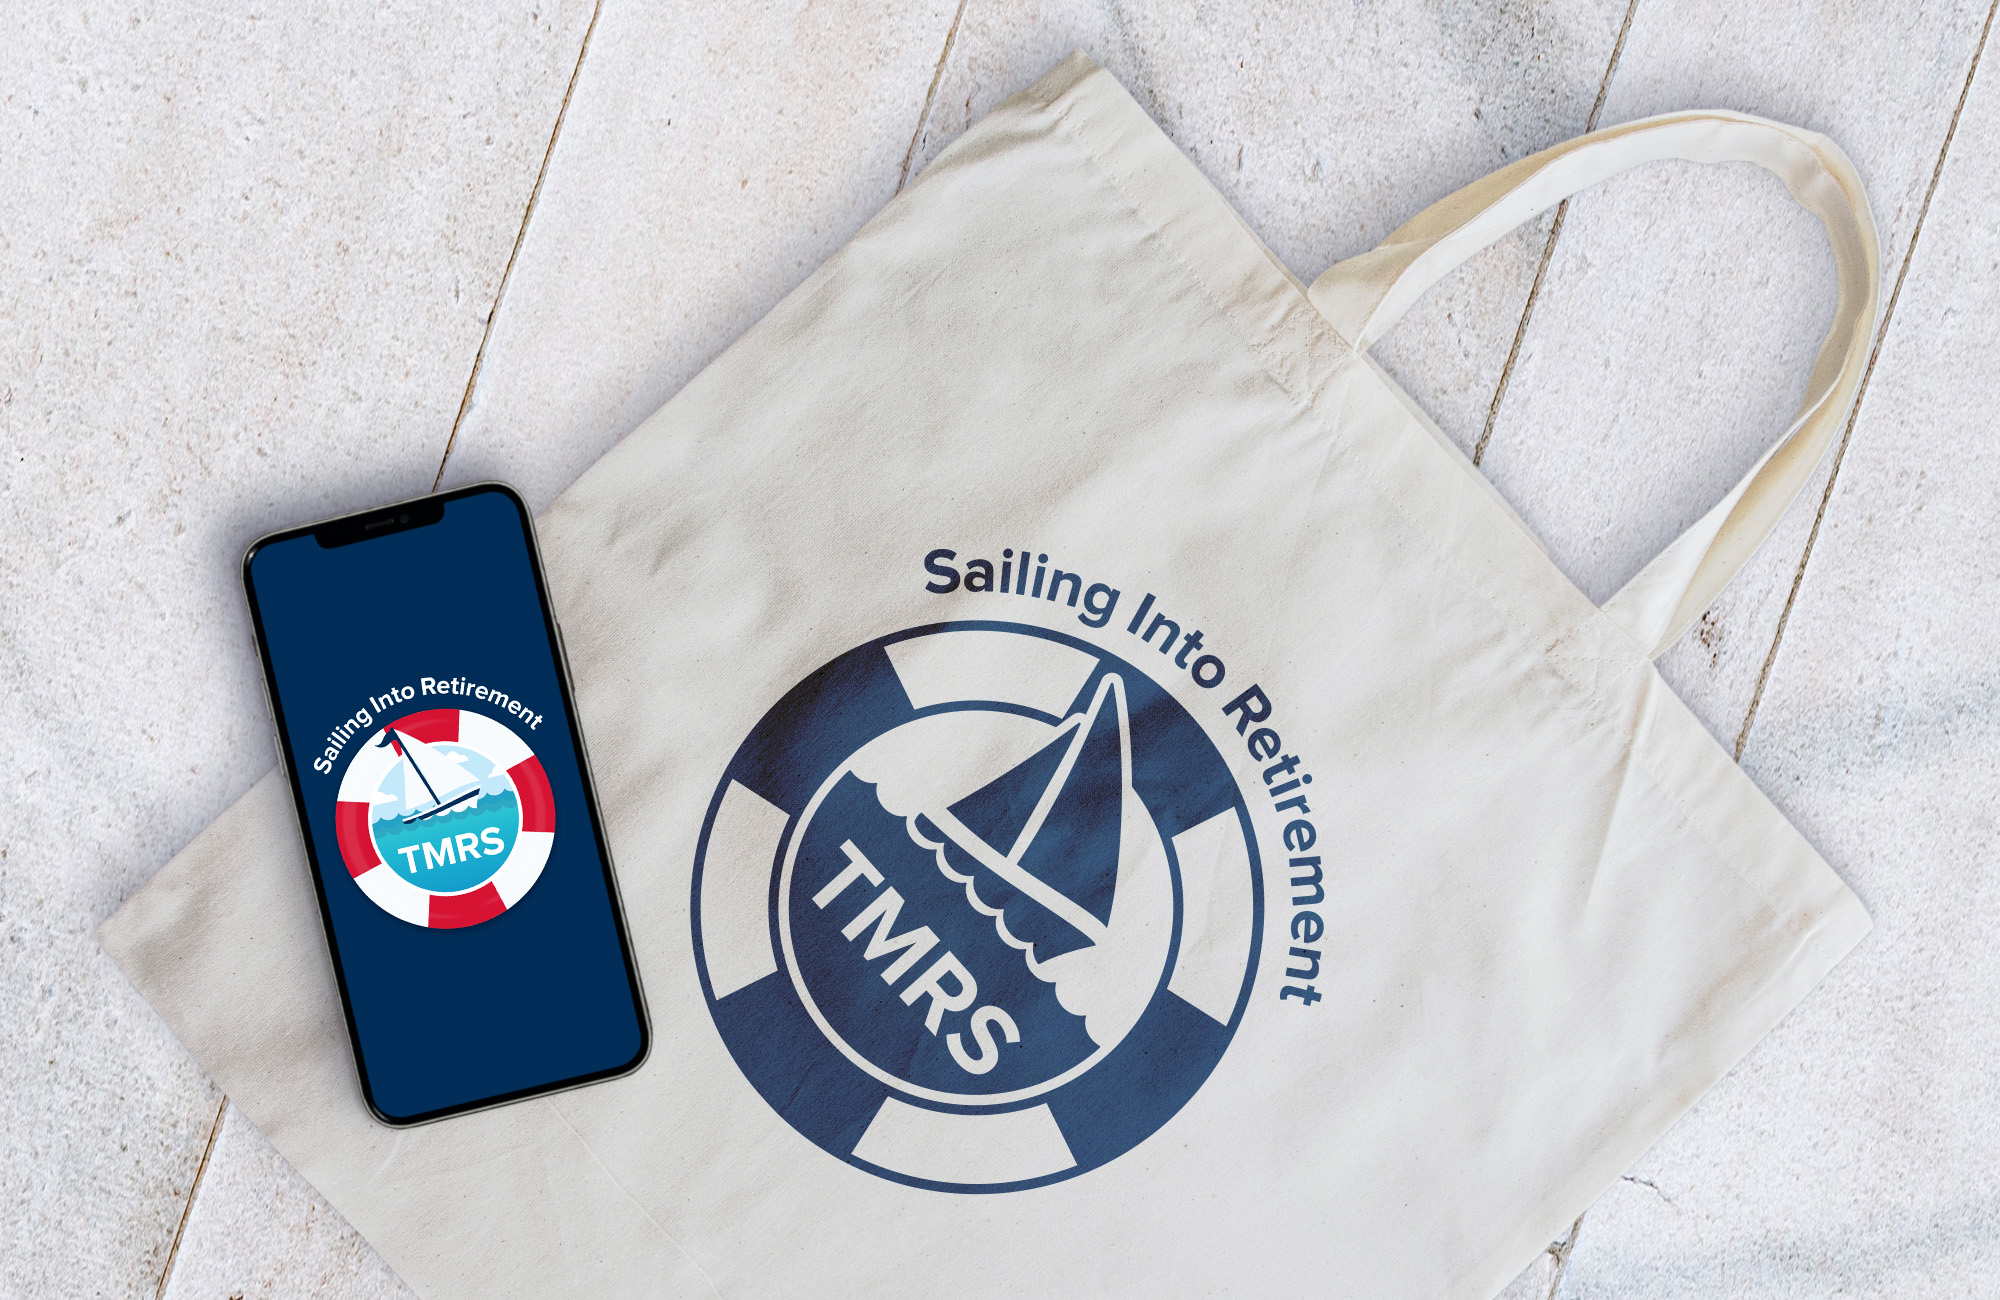 A phone open to a navy splash screen with a graphic resembling a sailboat encircled by a life preserver. Underneath the phone is a canvas bag with the same graphic.